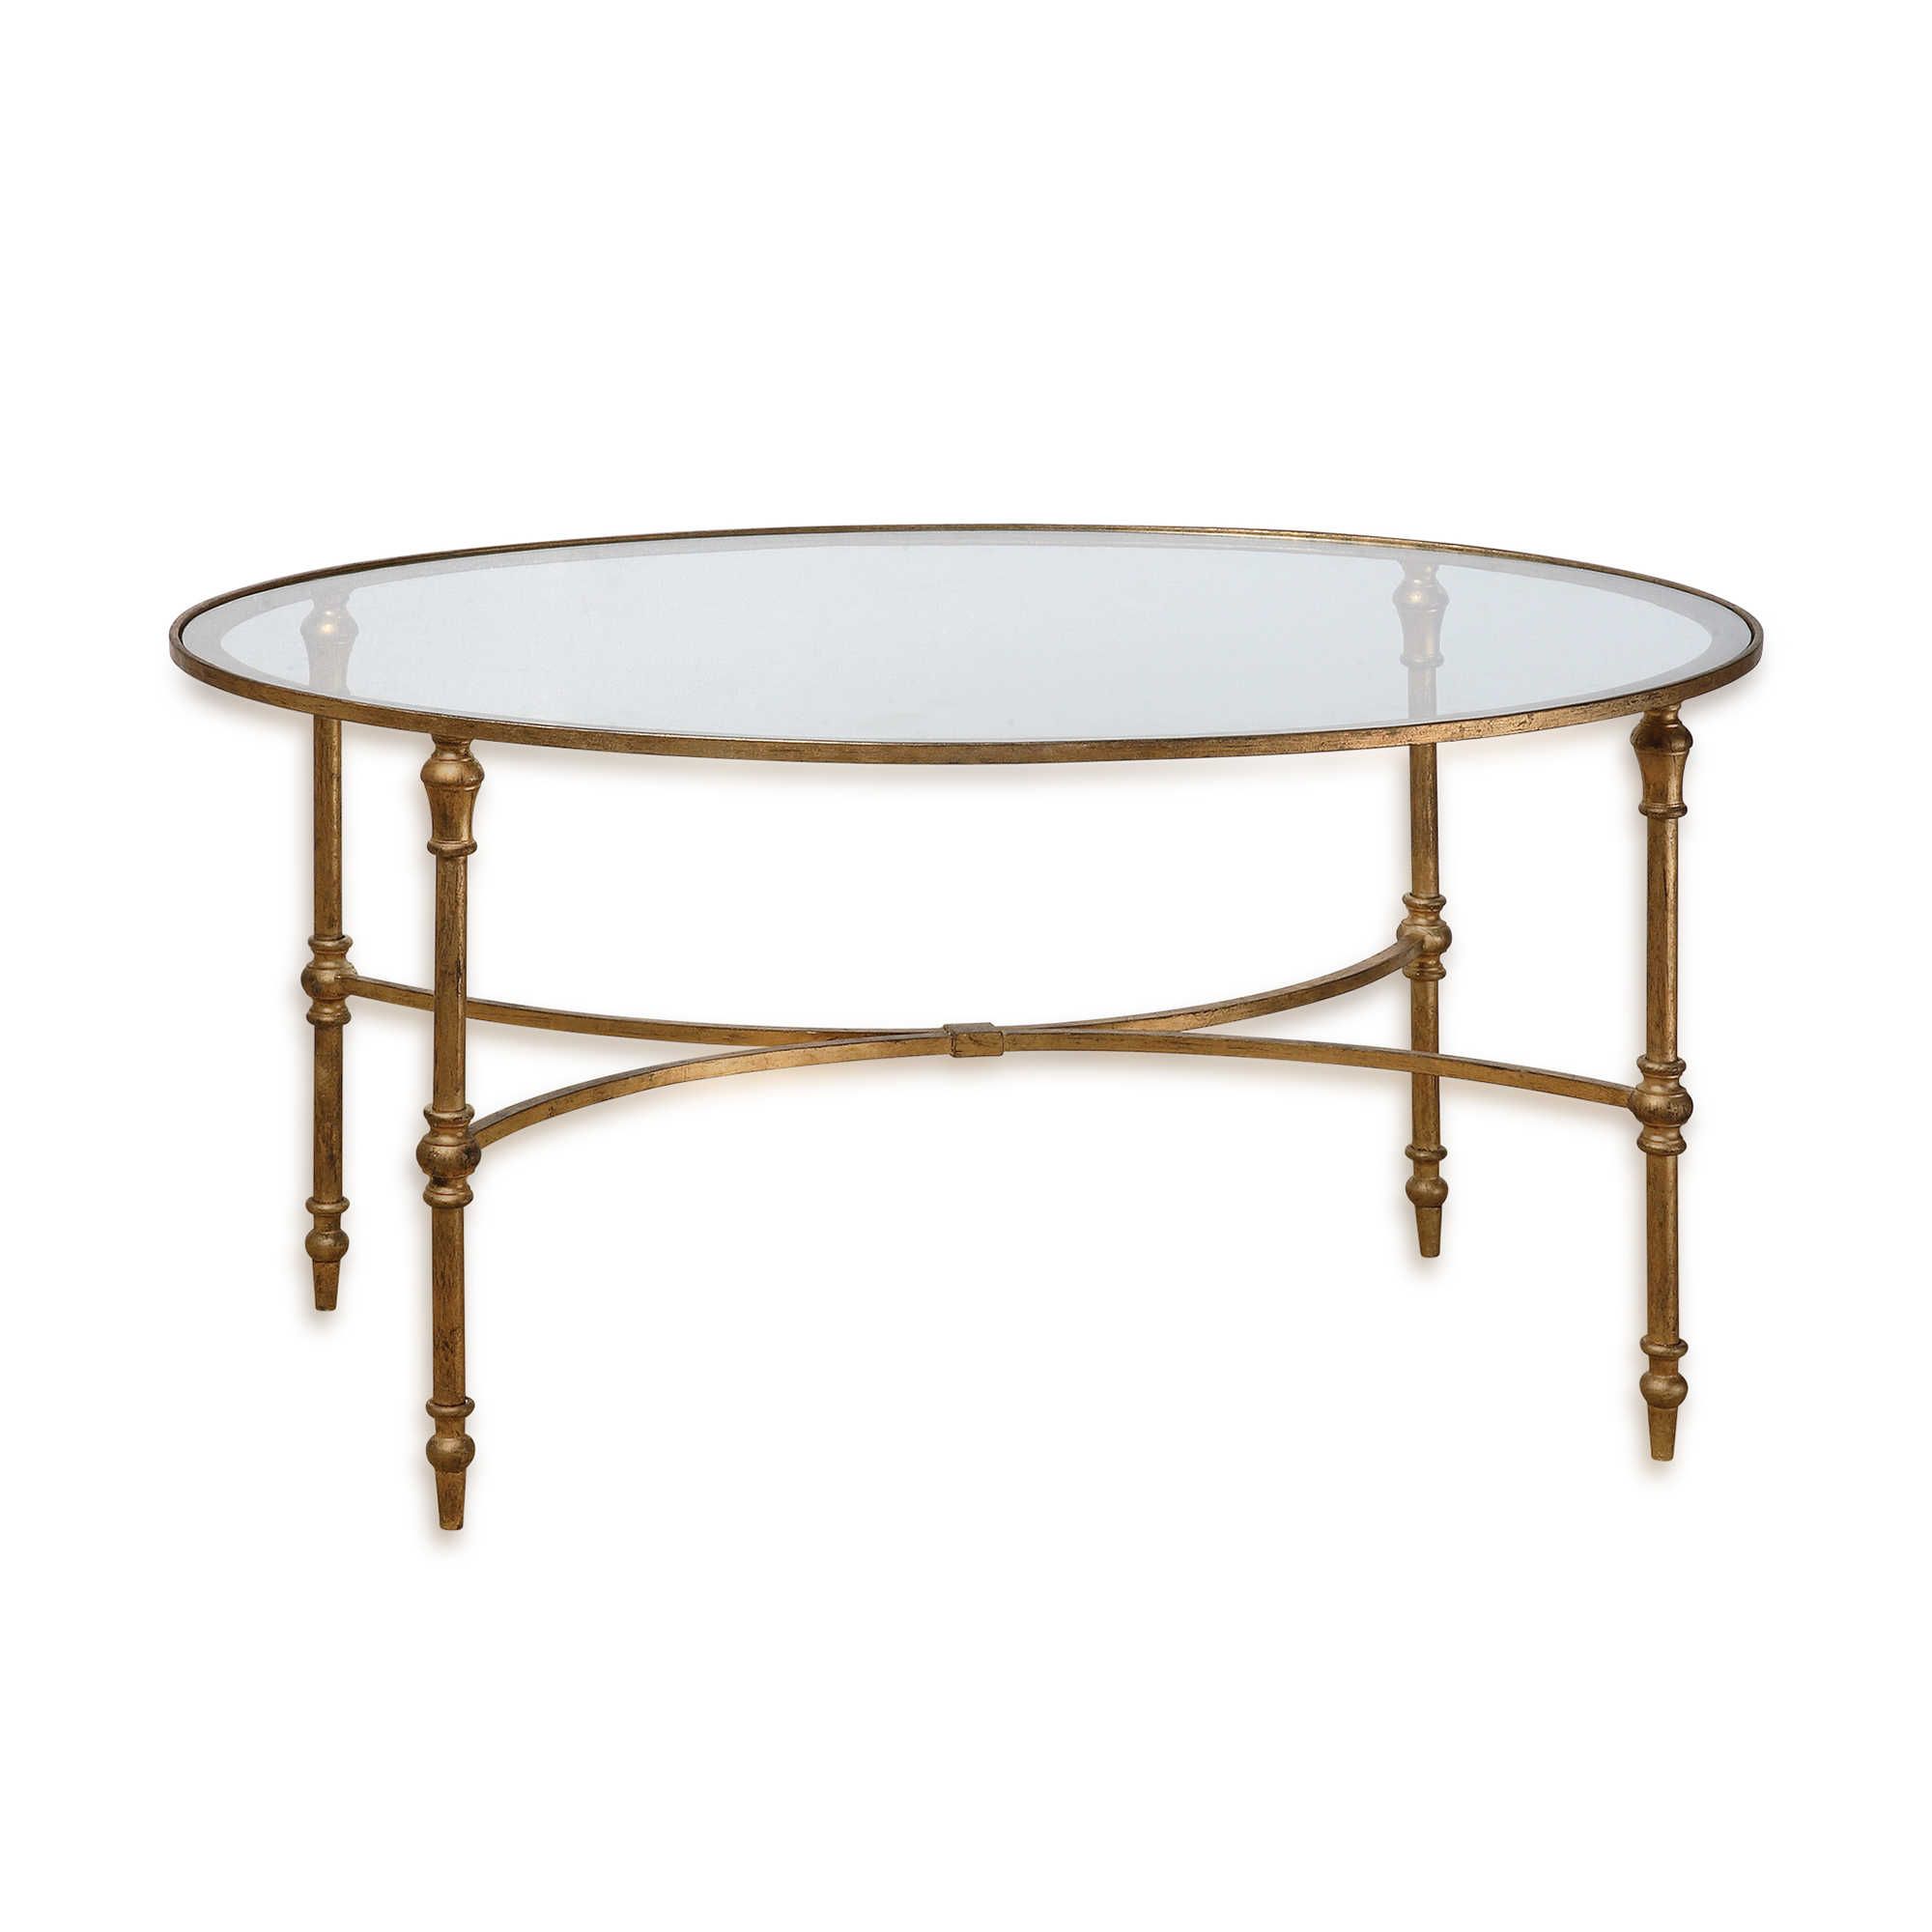 Small Glass Coffee Tables Create Accessible Home Ideas Throughout Recent Glass And Pewter Oval Coffee Tables (View 19 of 20)